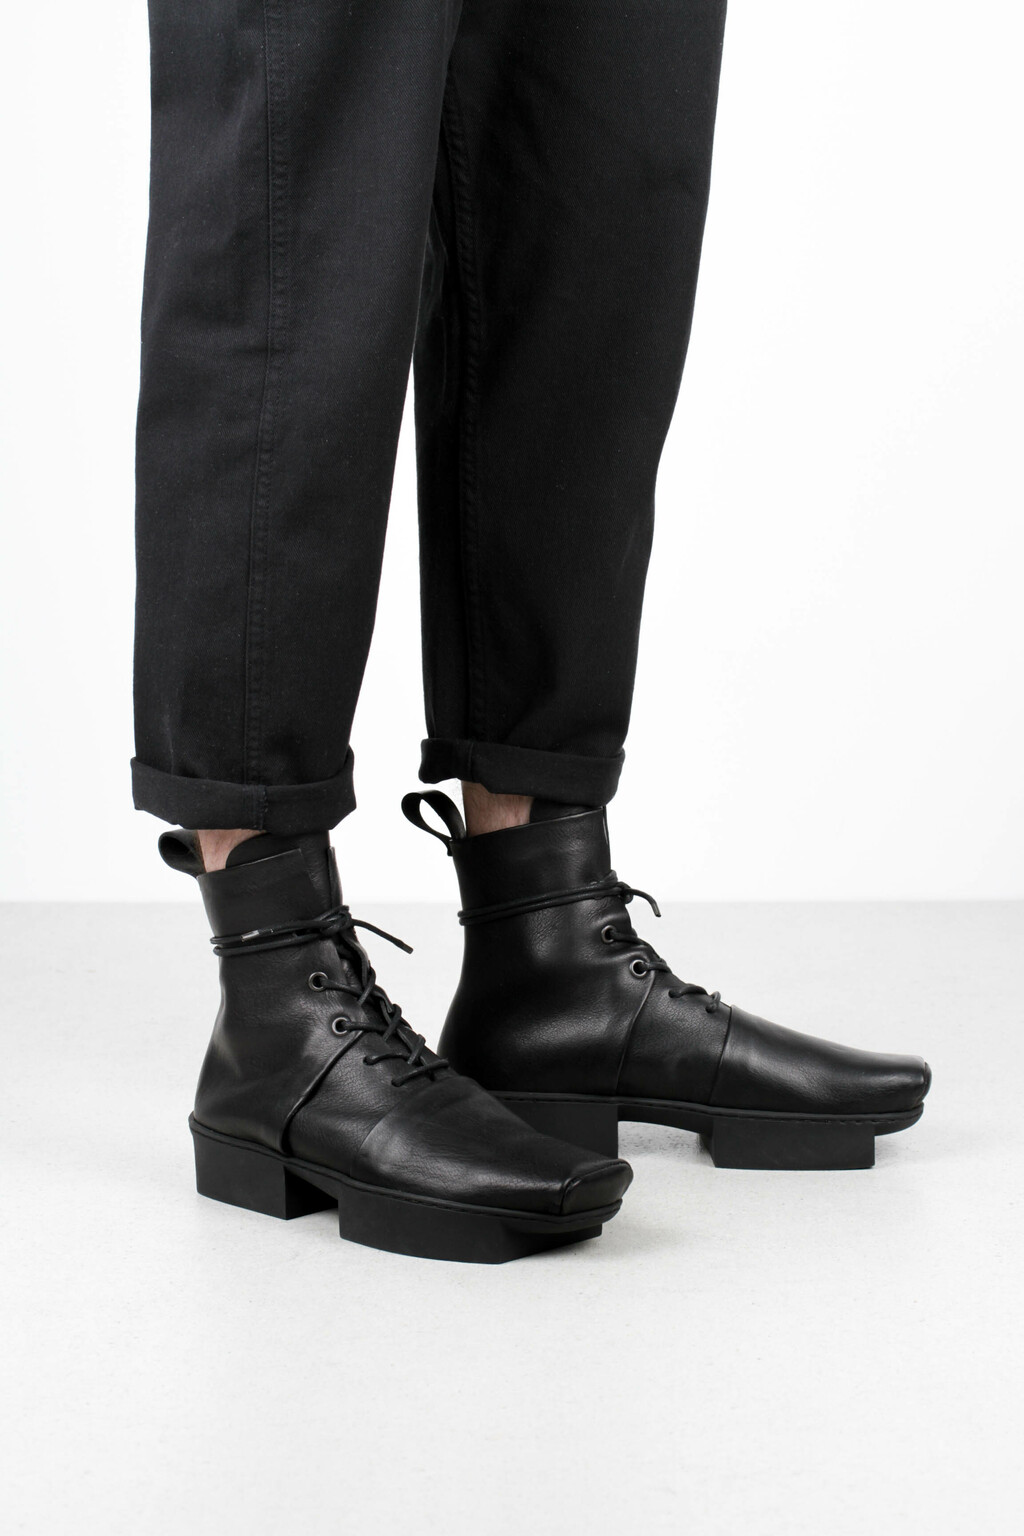 Outcome m - Trippen shoes - exceptional design and quality from Germany